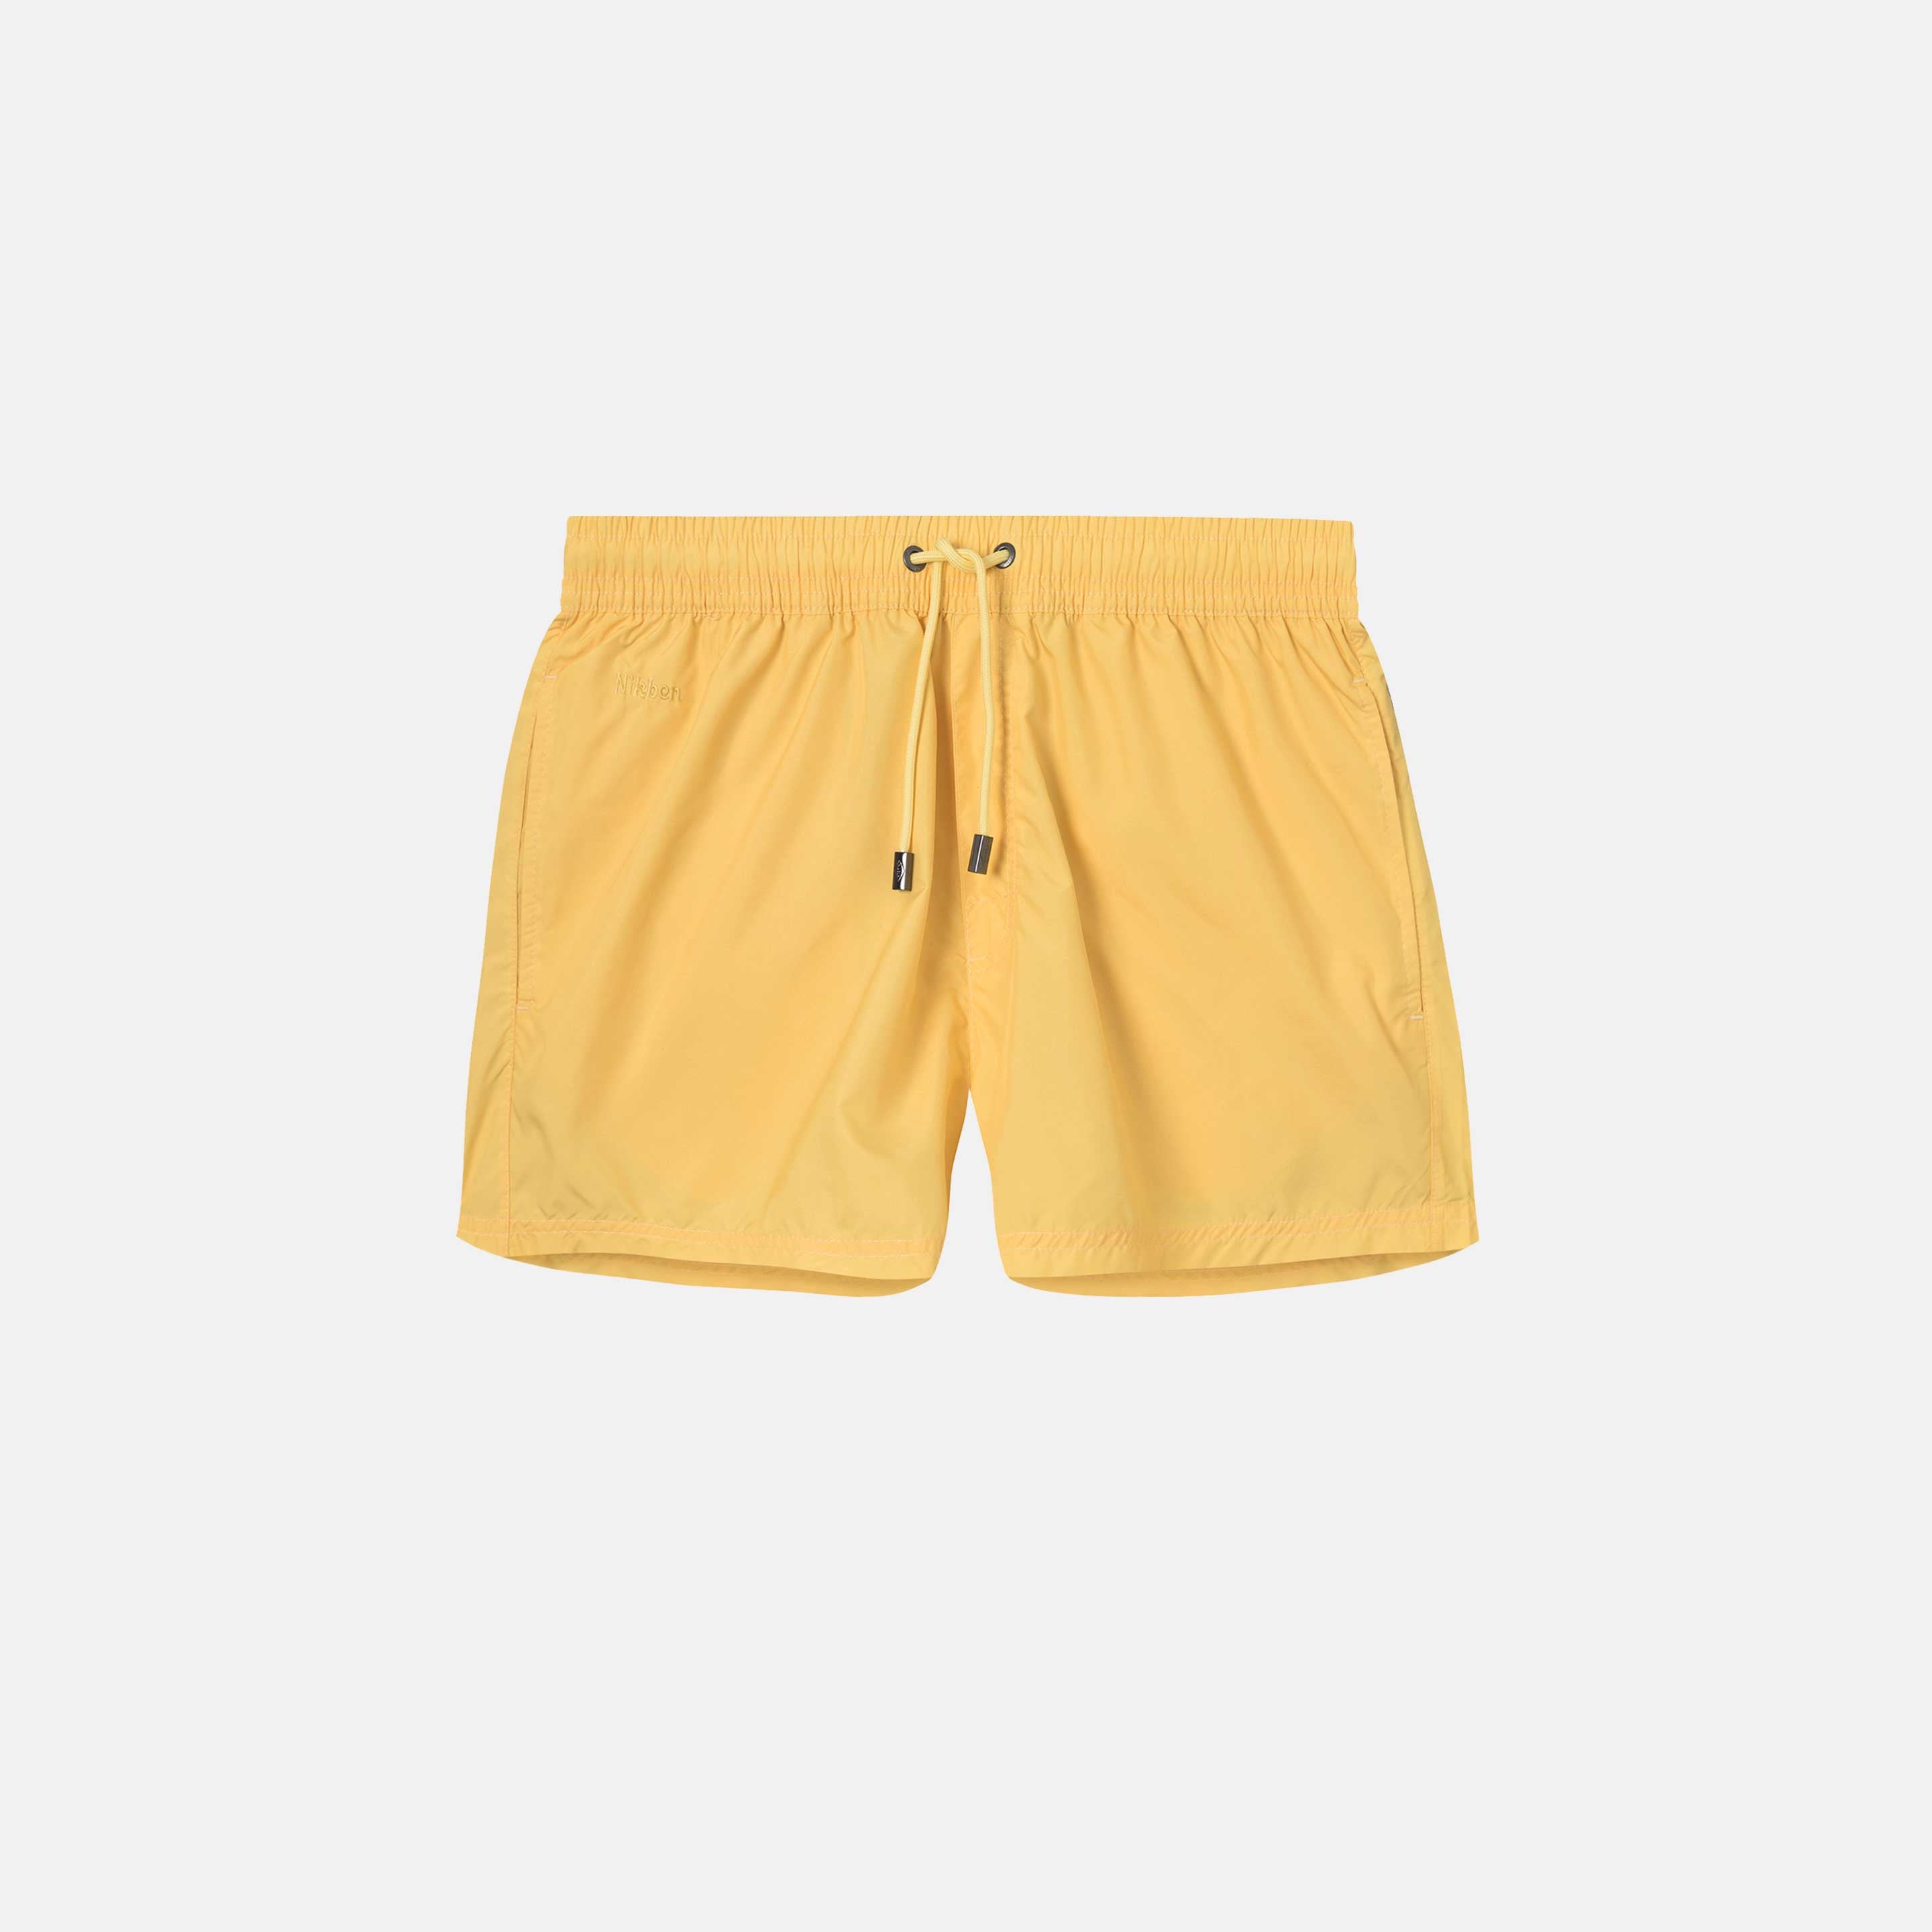 Yellow swim trunks. Mid length with drawstring and two side pockets.